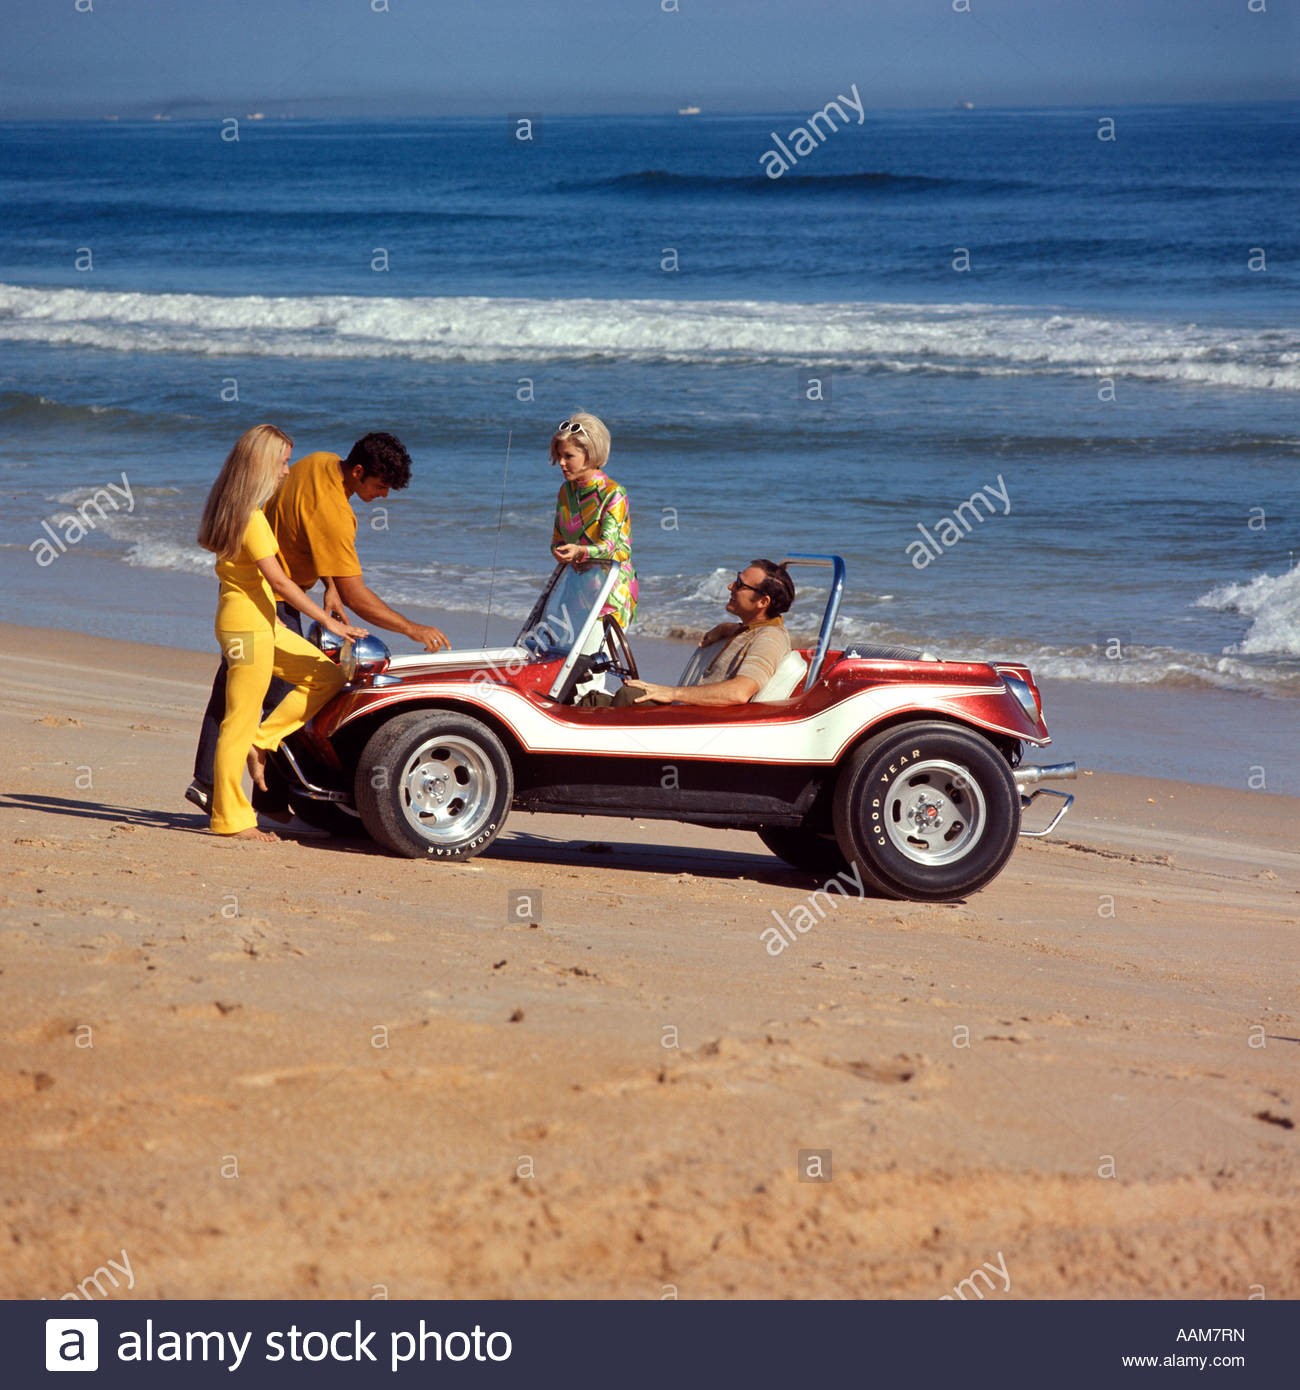 2 1970s couples on beach with a red white dune buggy.